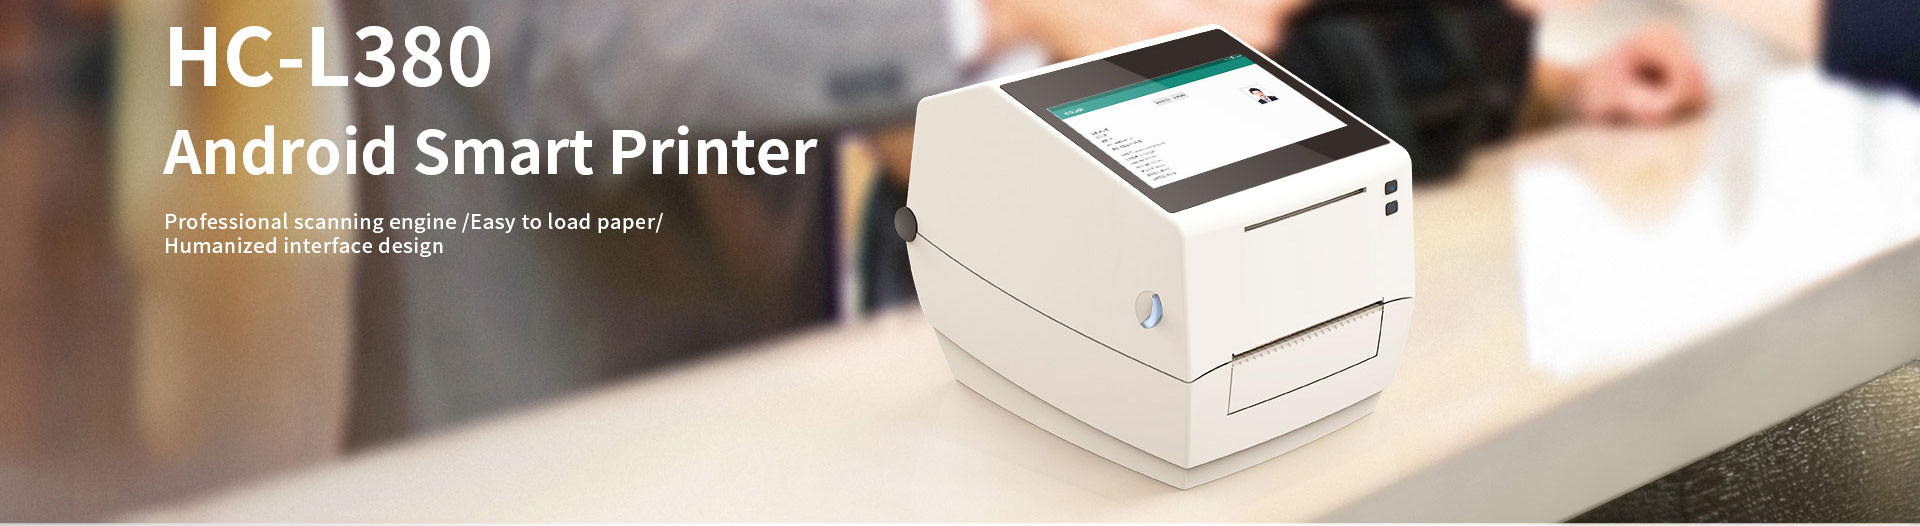 Android printer with professional scanning engine